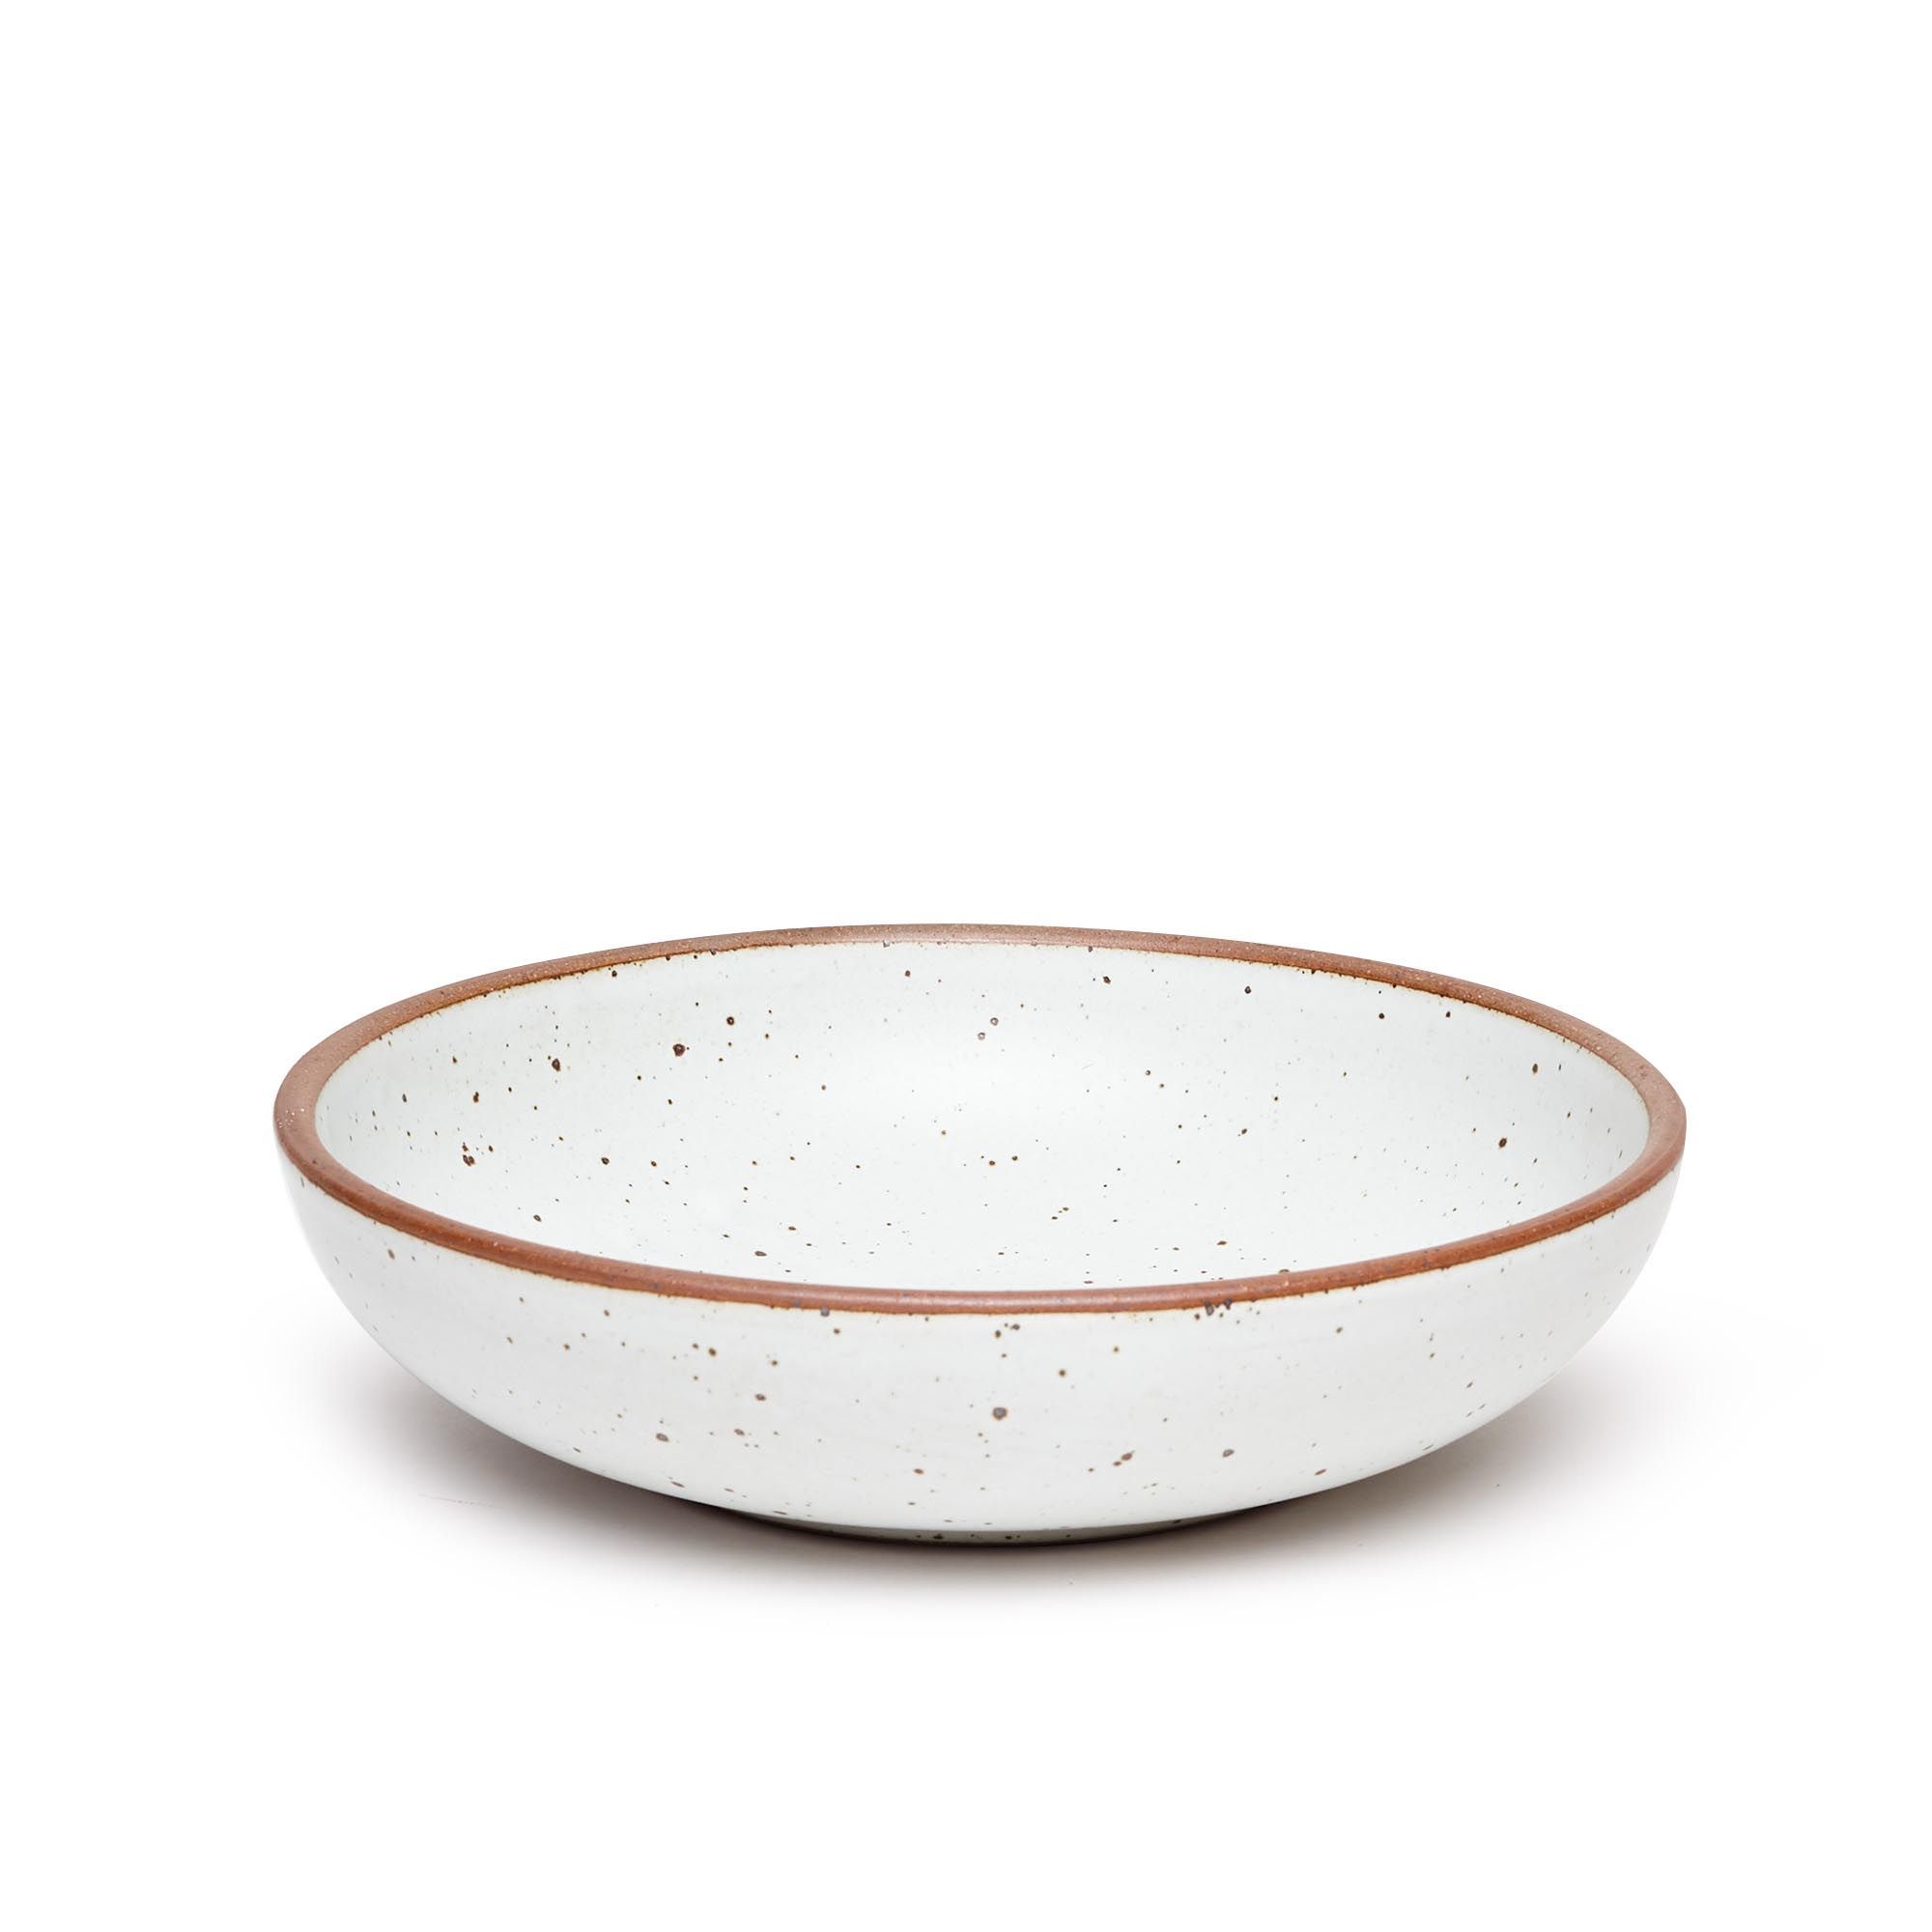 A large shallow serving ceramic bowl in a cool white color featuring iron speckles and an unglazed rim.